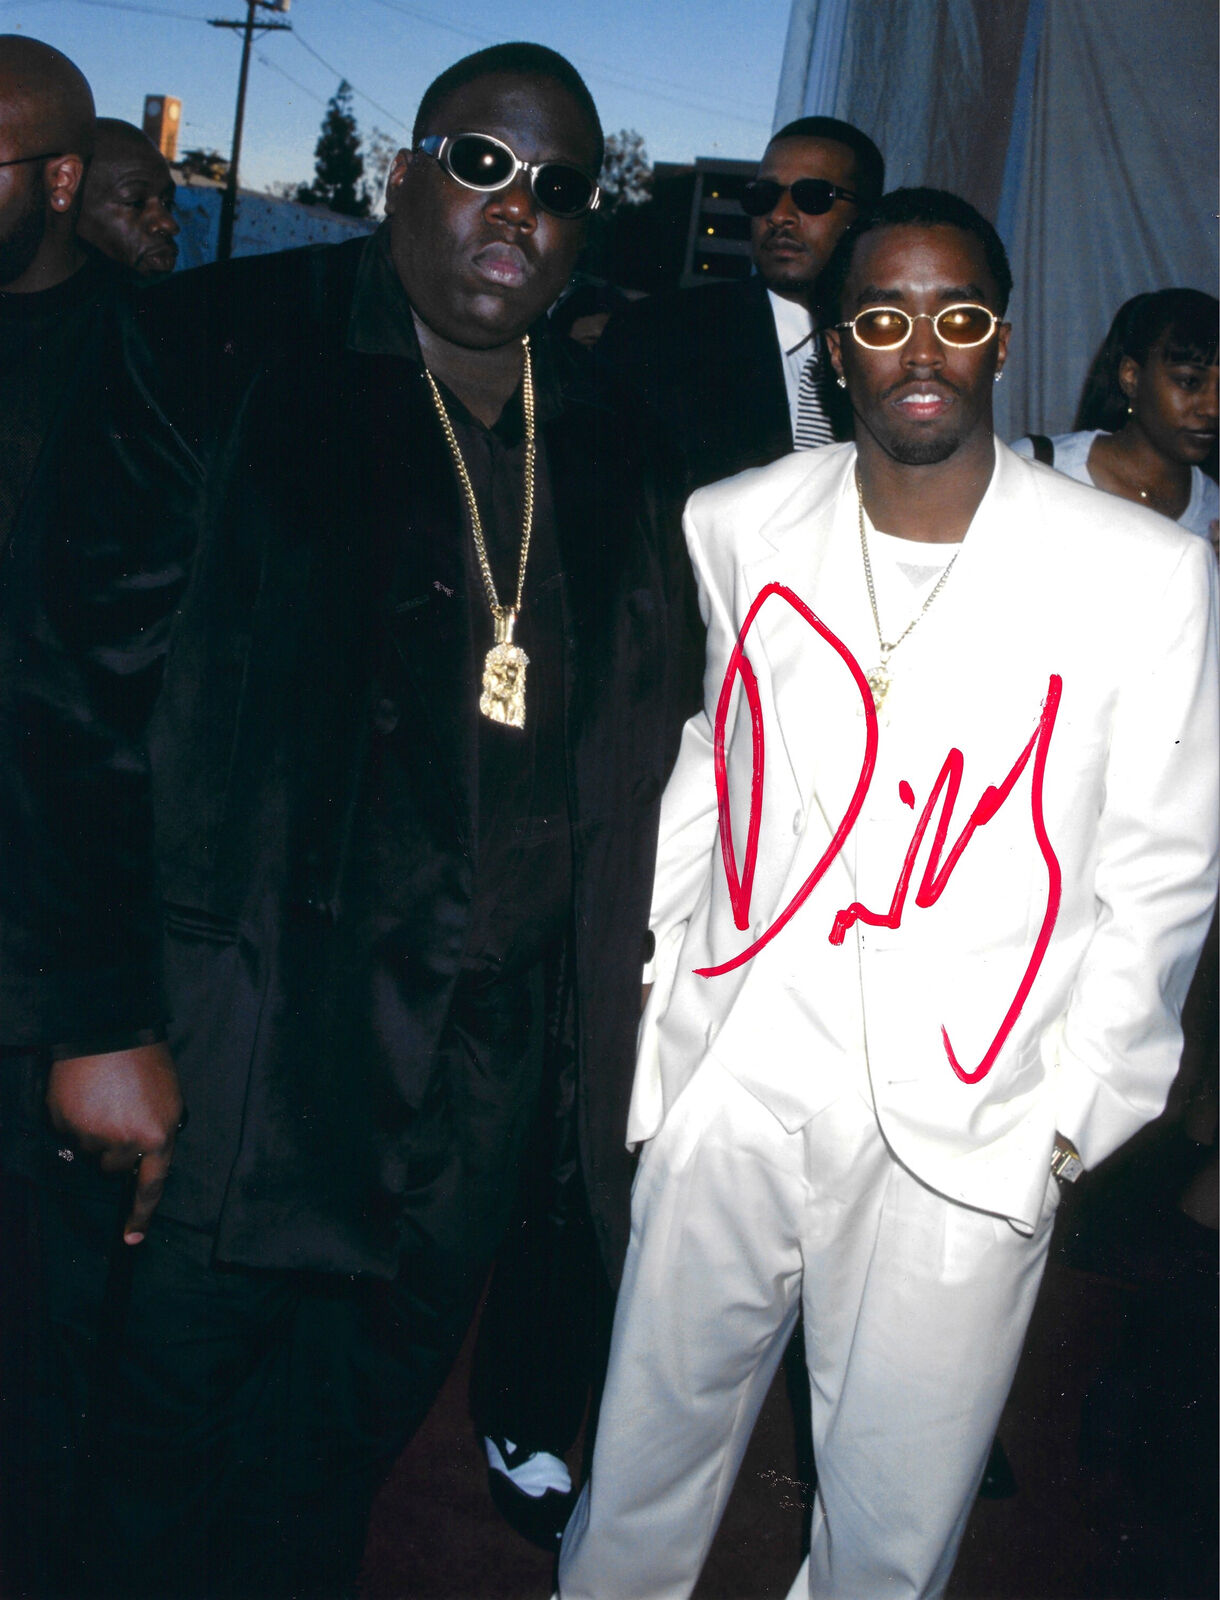 P DIDDY SEAN COMBS SIGNED 14x11 PHOTO BAD BOY NOTORIOUS BIG (AFTAL COA)